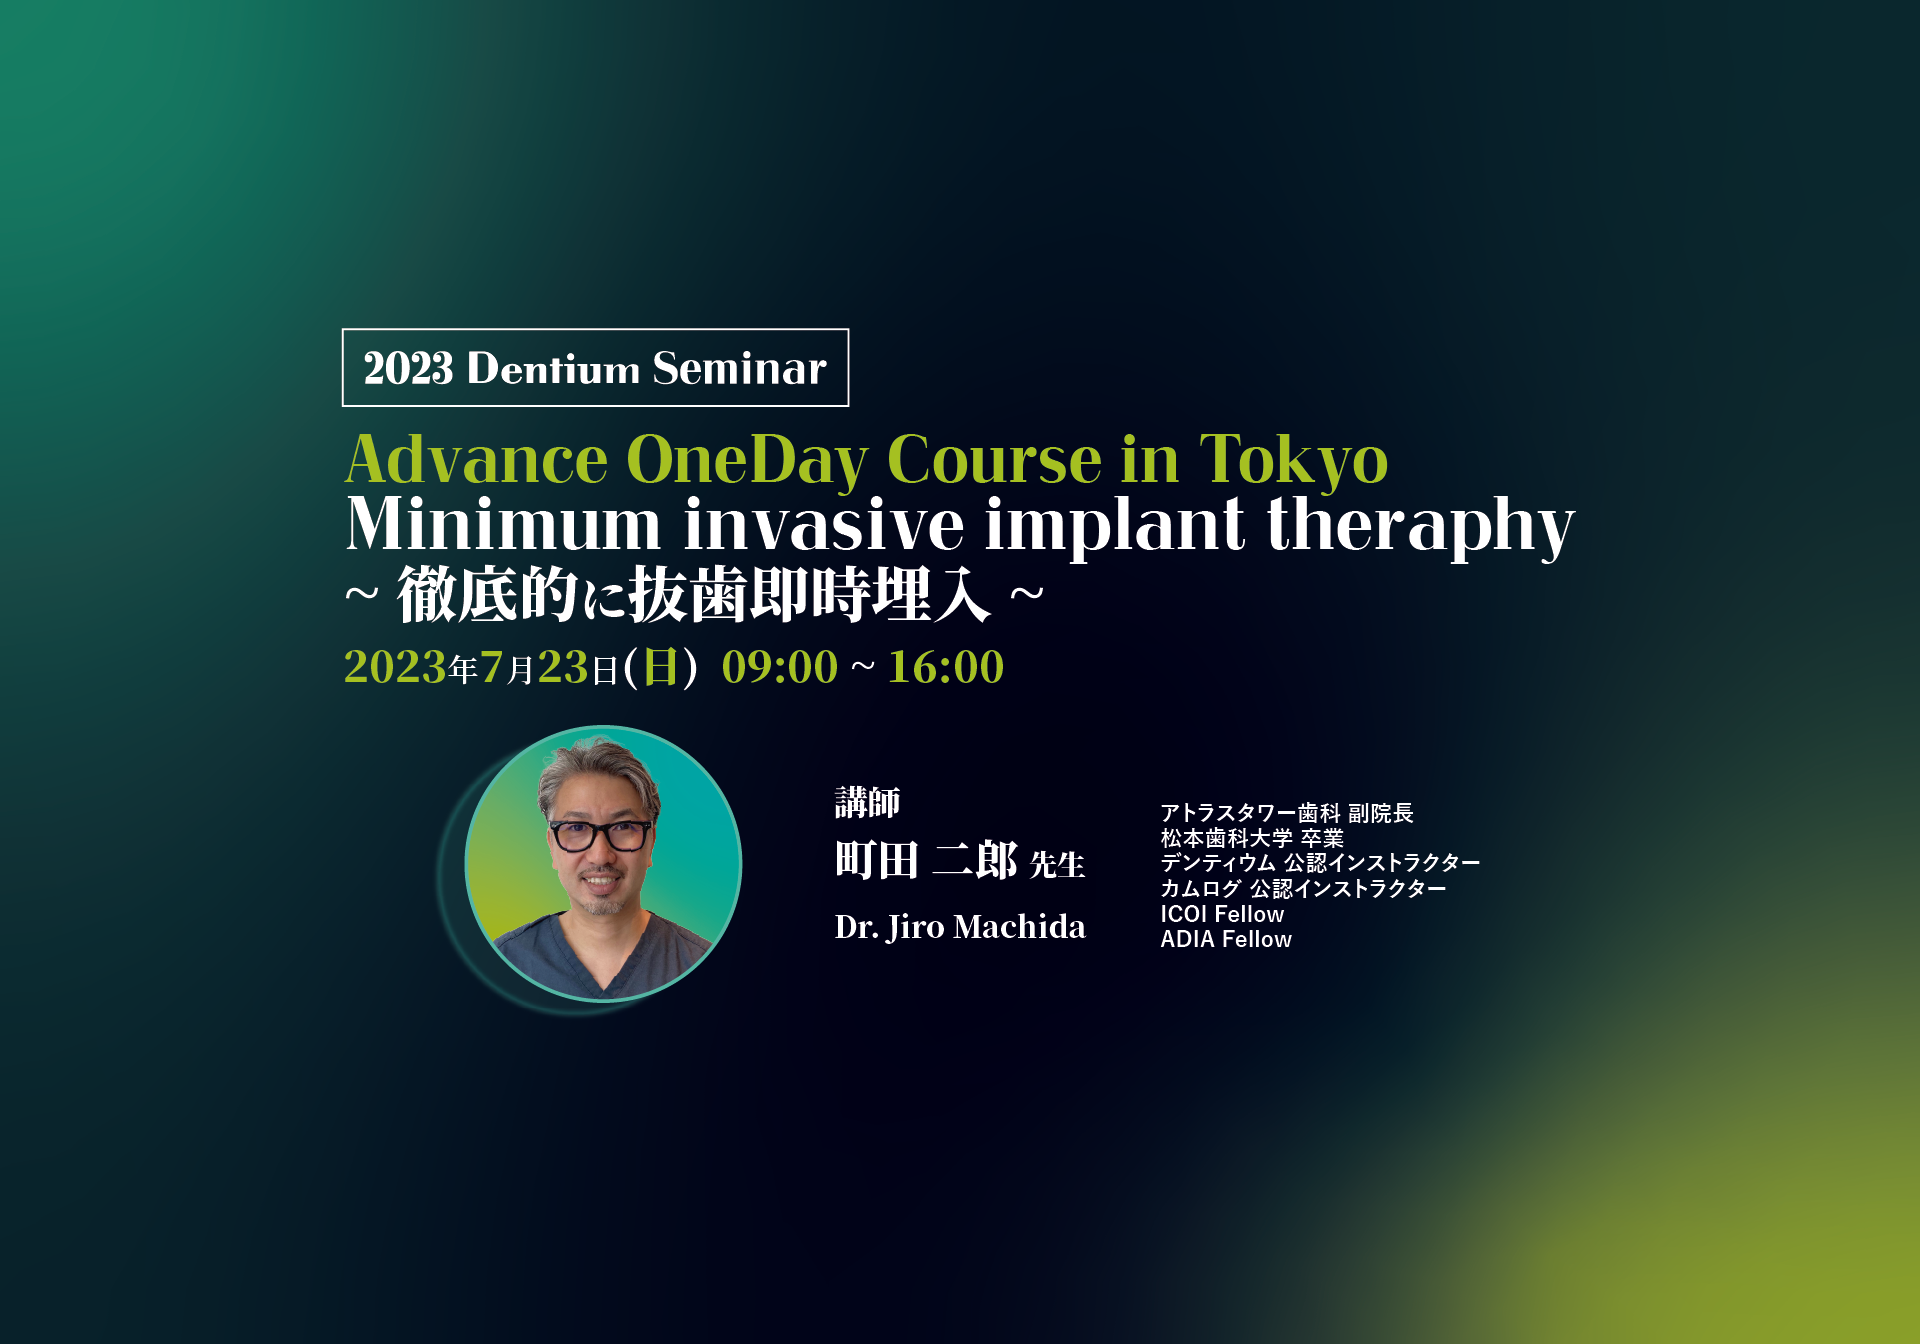 Advance OneDay Course 2023 in Tokyo